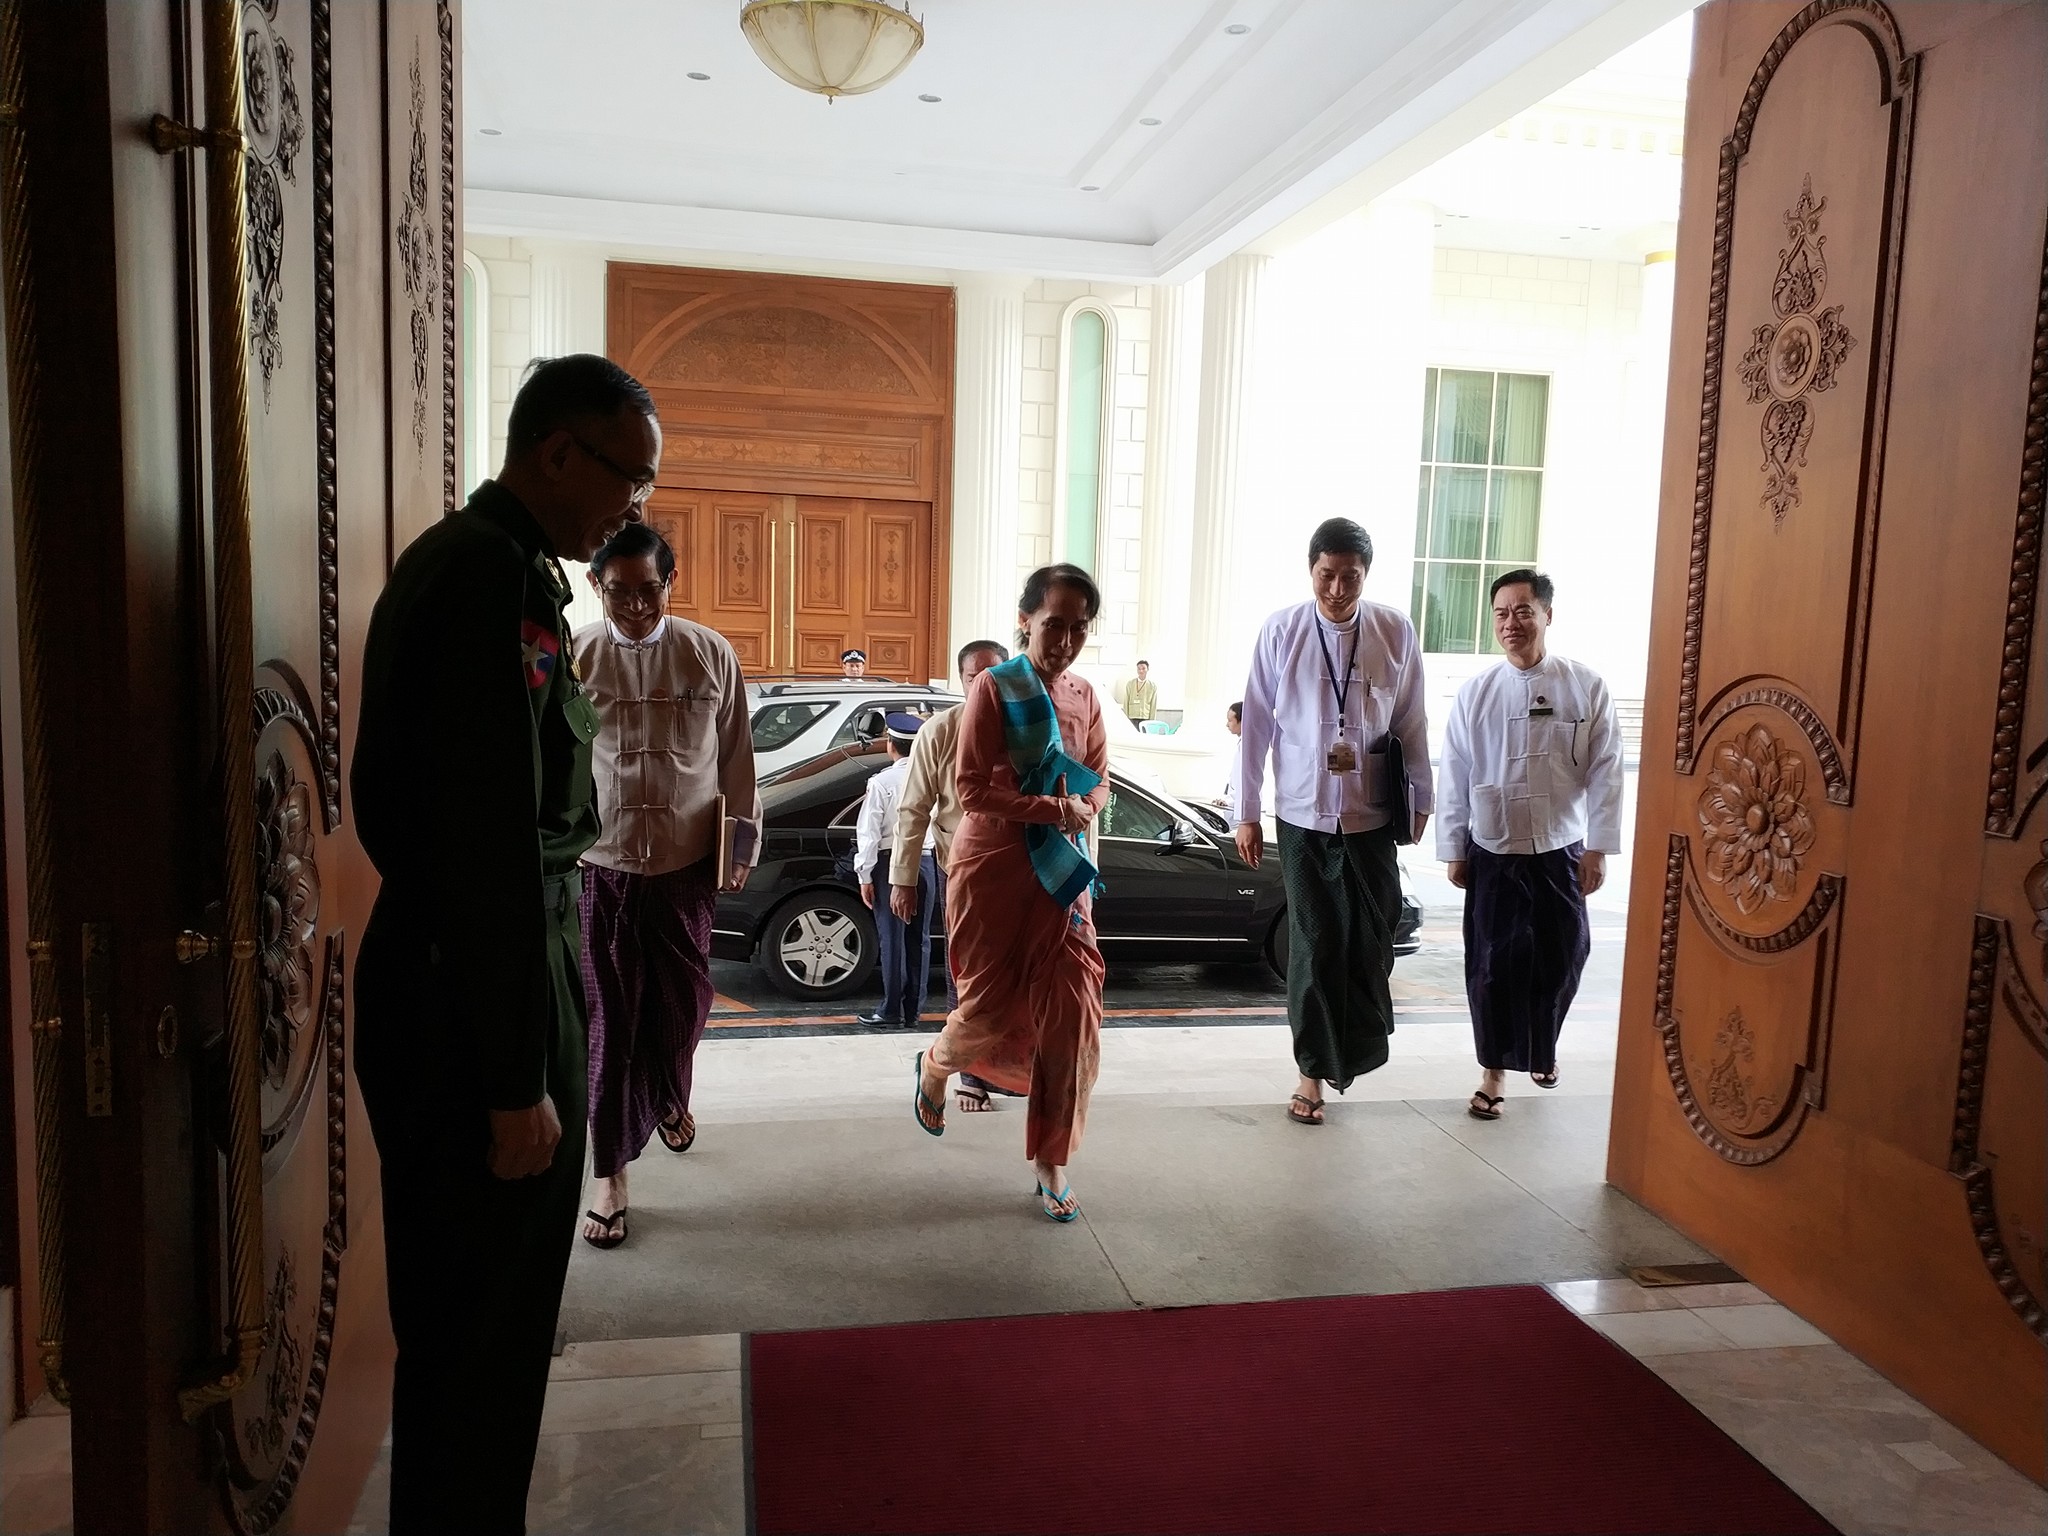 State Counsellor Aung San Suu Kyi enters the president’s residence on Jan. 3, 2018. Photo: Facebook / State Counsellor Office